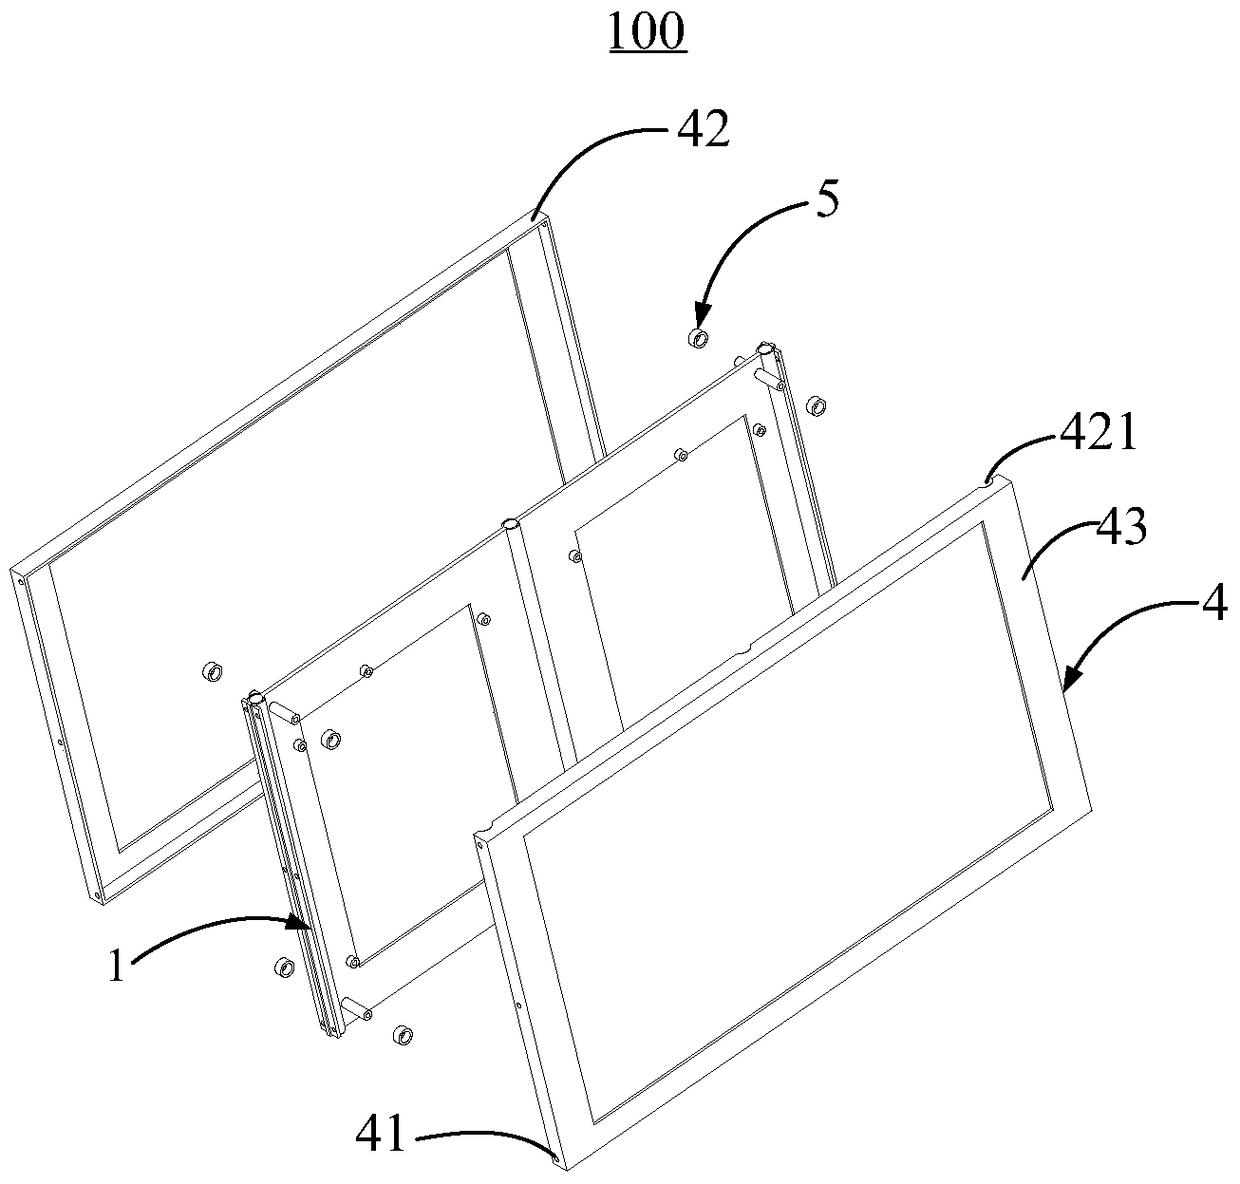 The middle frame of the display, the casing of the display and the display